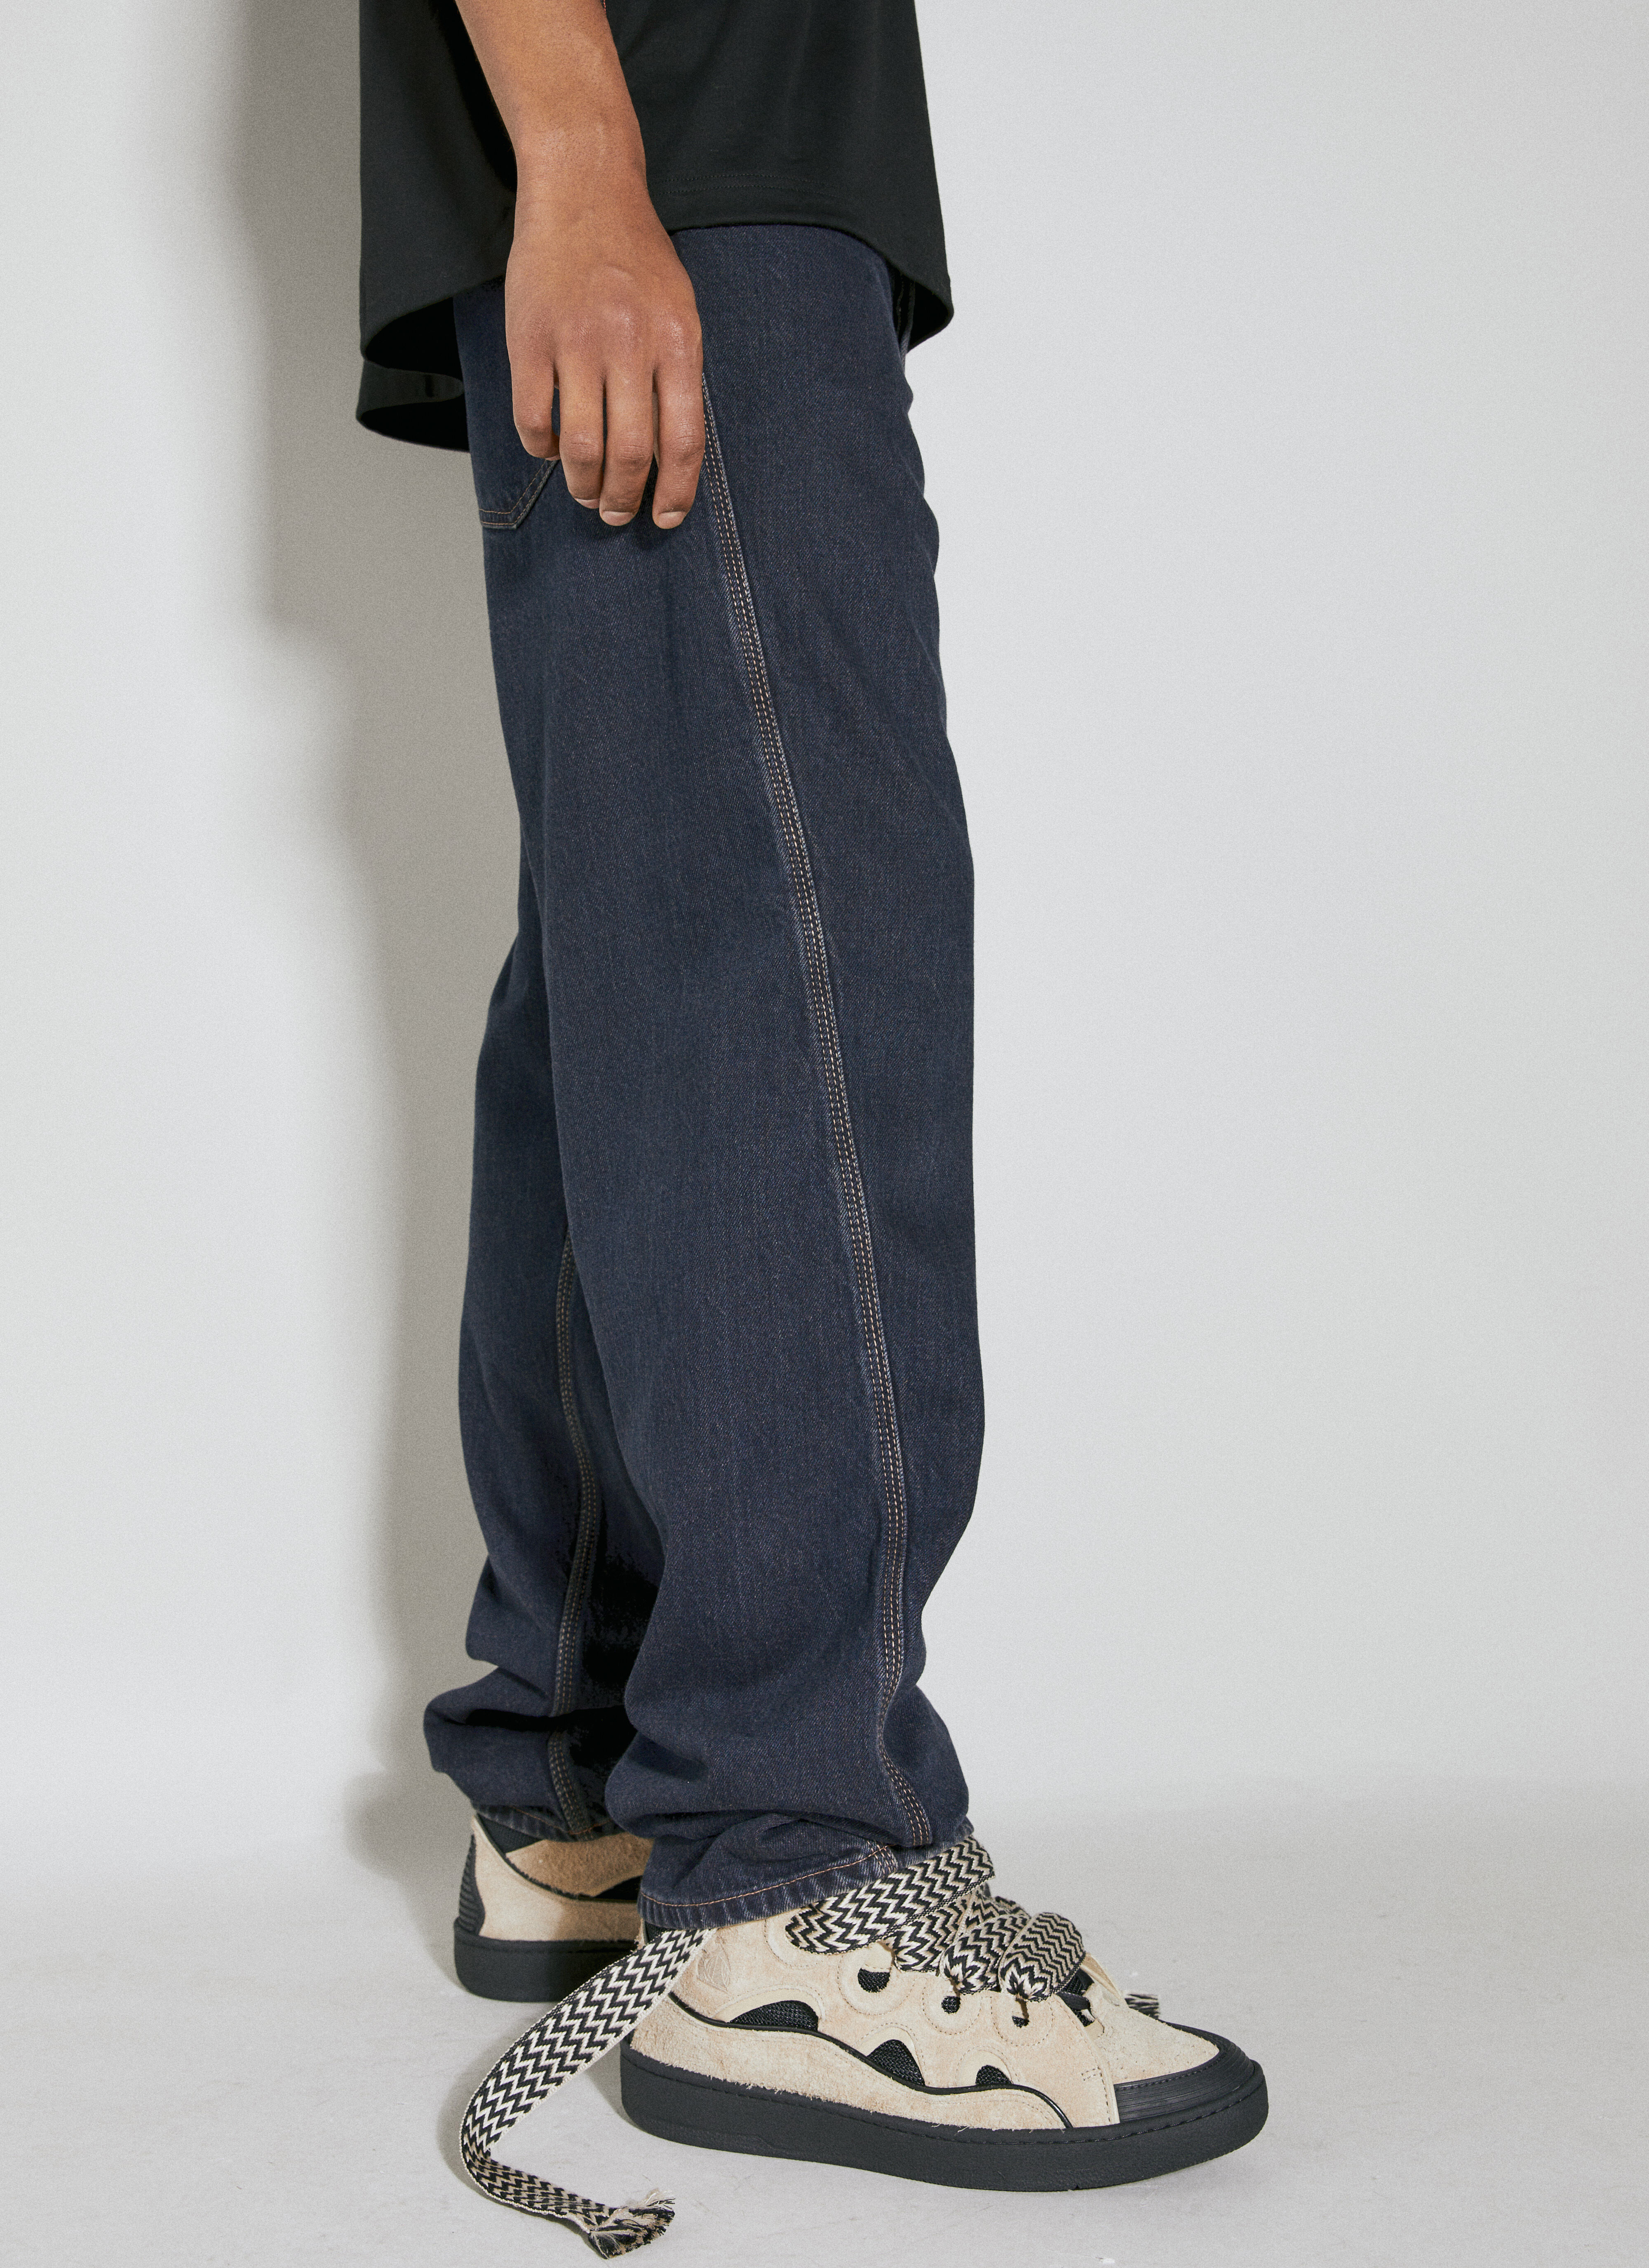 Rick Owens Baggy Twisted Leg Jeans Grey ric0154008